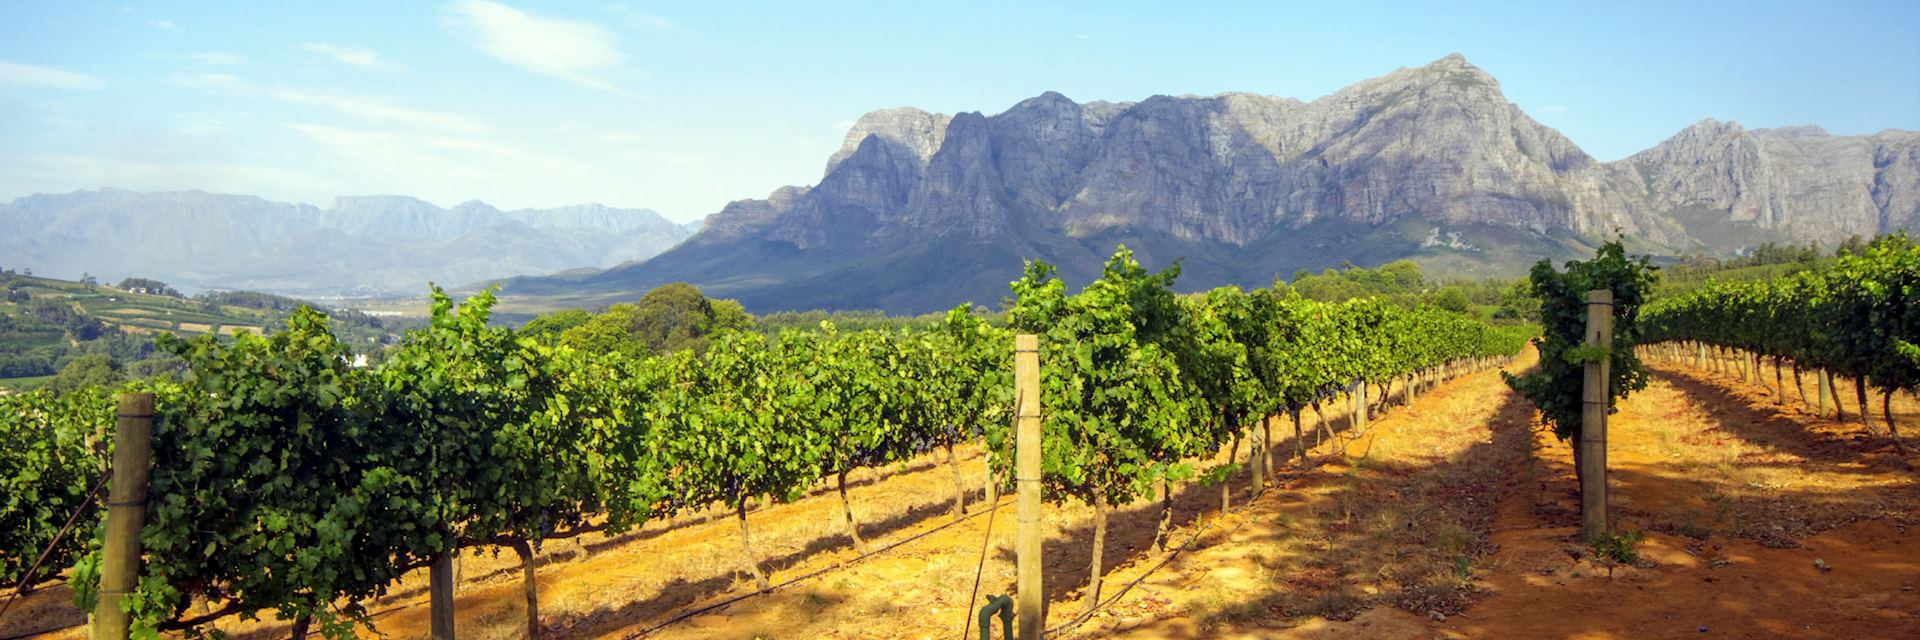 The Winelands region to the east of Cape Town